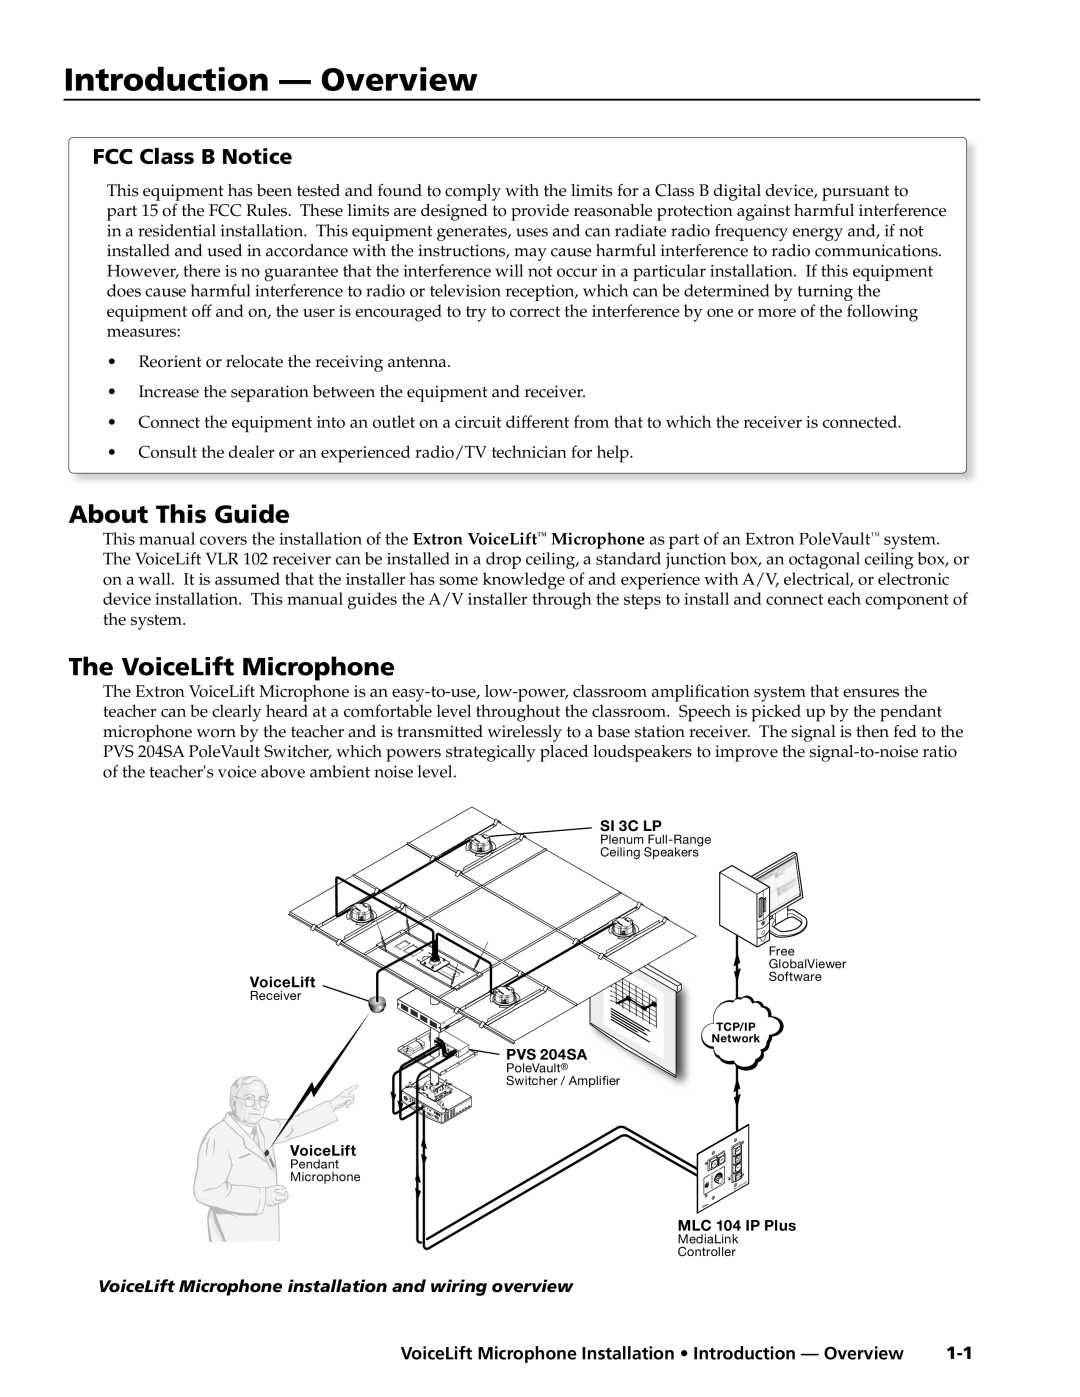 Extron electronic VLM 2000 manual Introduction - Overview, About This Guide, The VoiceLift Microphone, FCC Class B Notice 